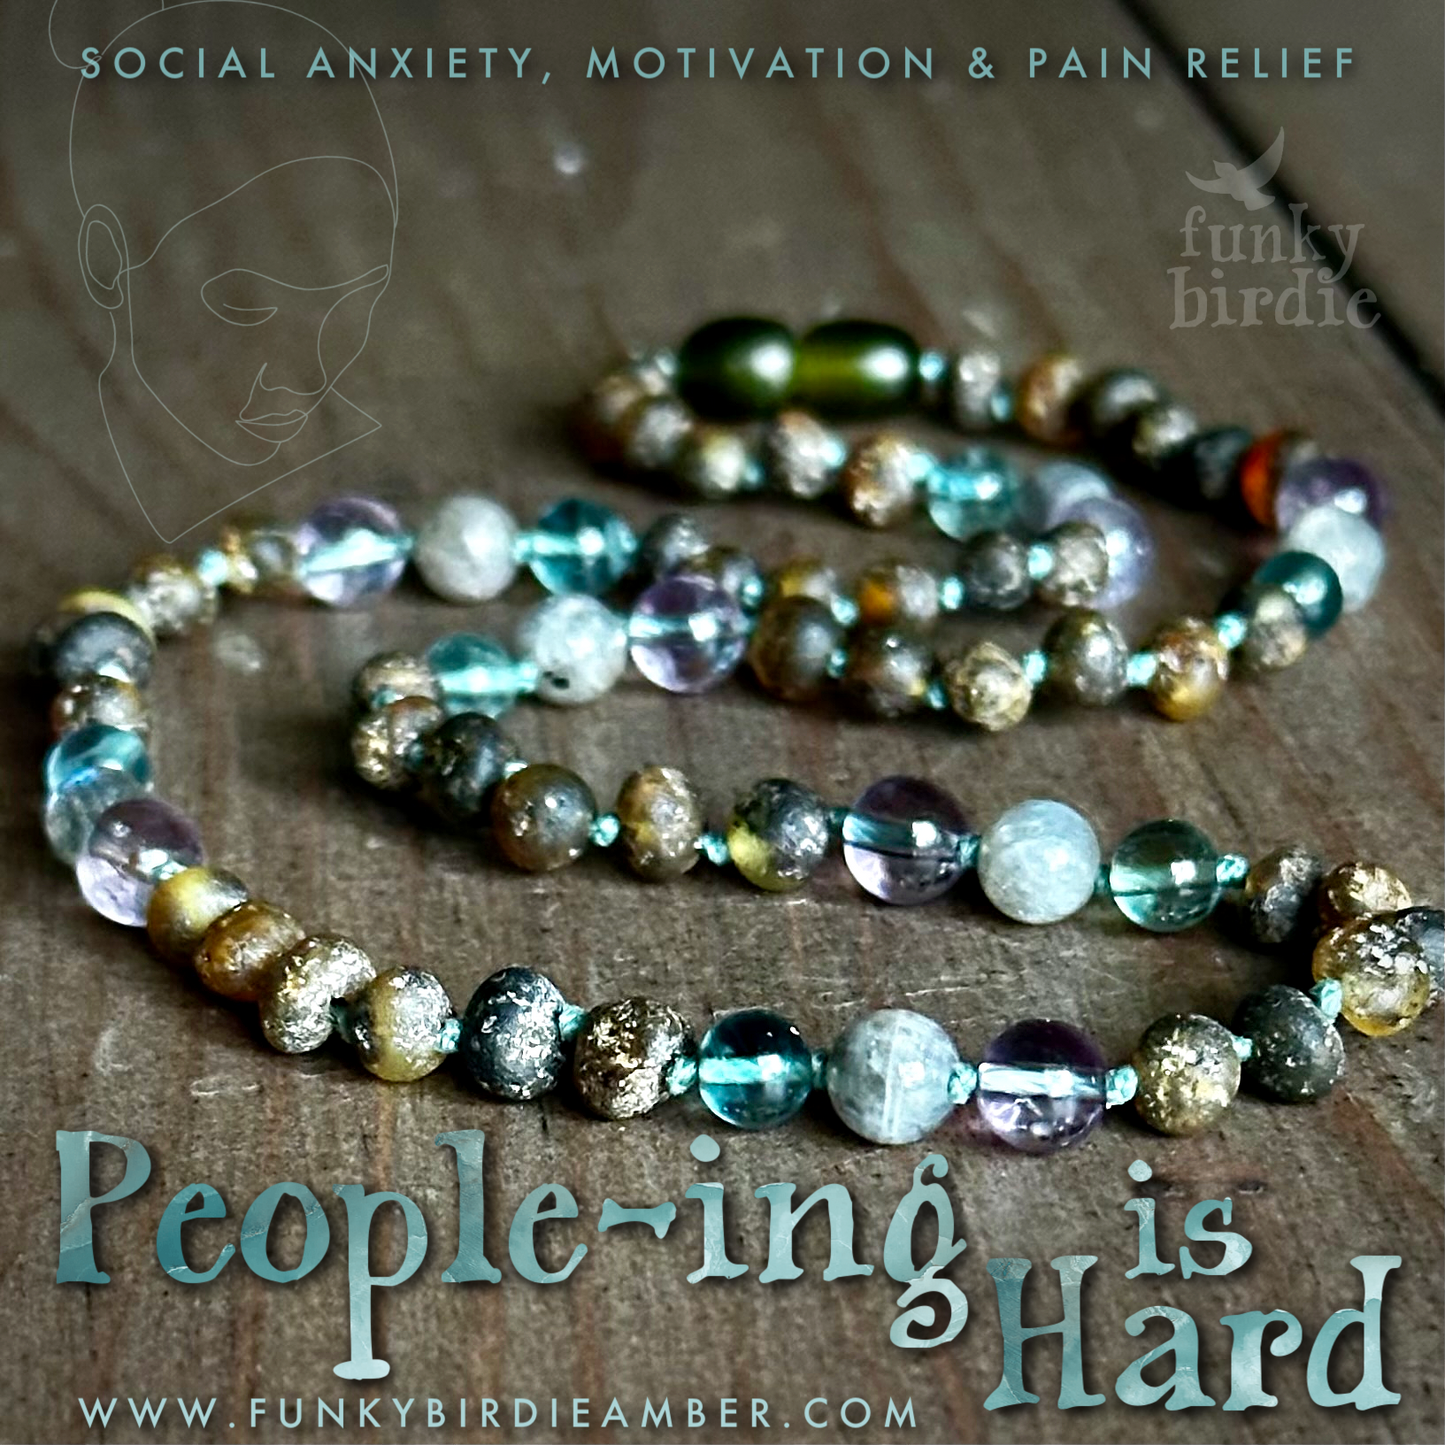 People-ing is Hard Necklace for Social Anxiety, Motivation & Pain Relief